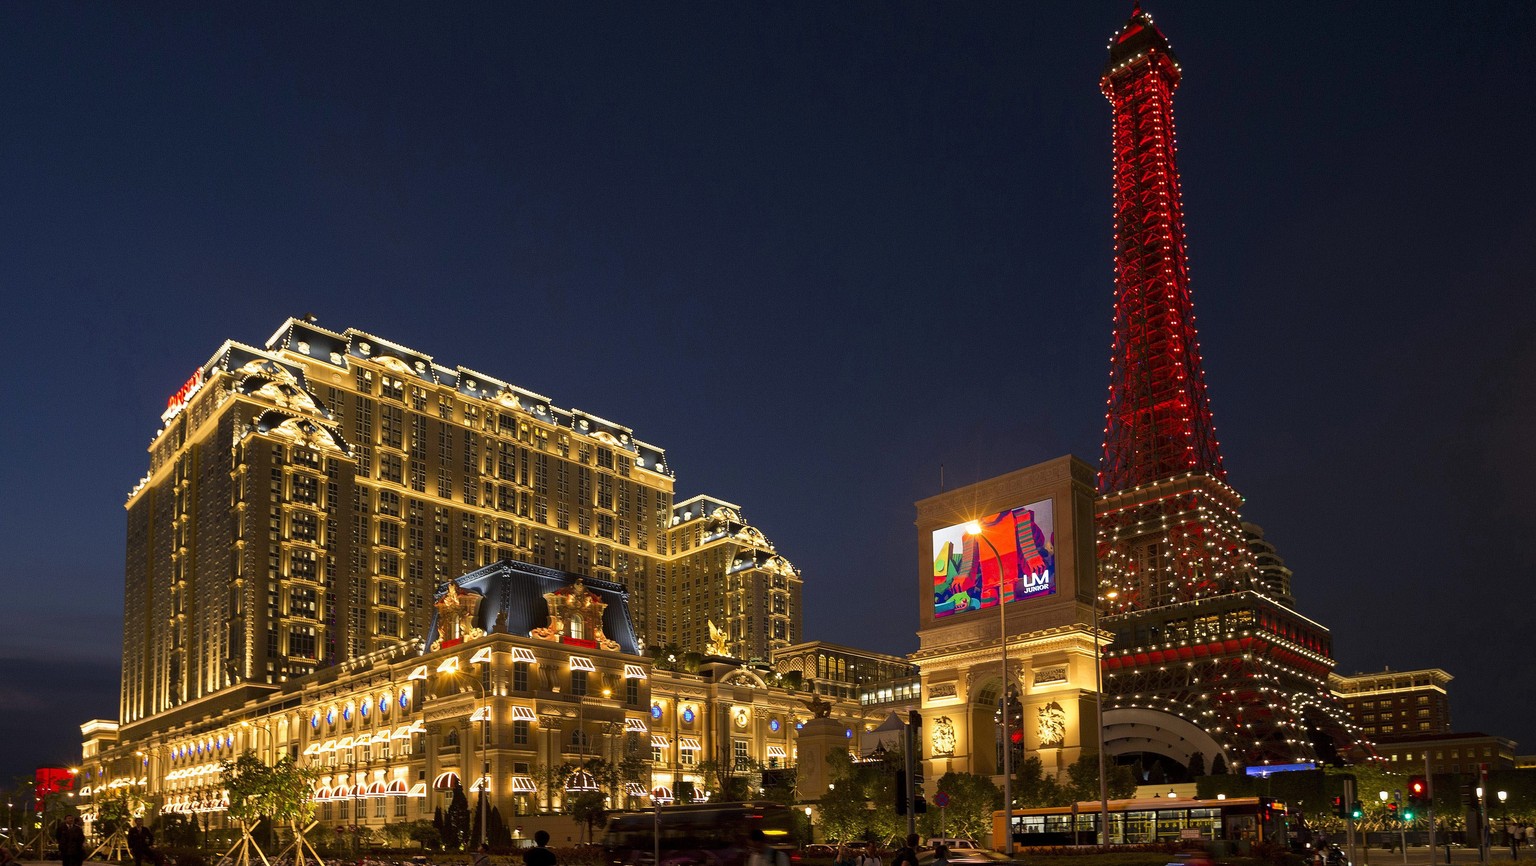 epa05537848 The new luxury hotel resort &#039;Parisian&#039;, owned by American casino magnate Sheldon Adelson, illuminated as it opens in Macao, China, 13 September 2016. The new hotel resort inspire ...